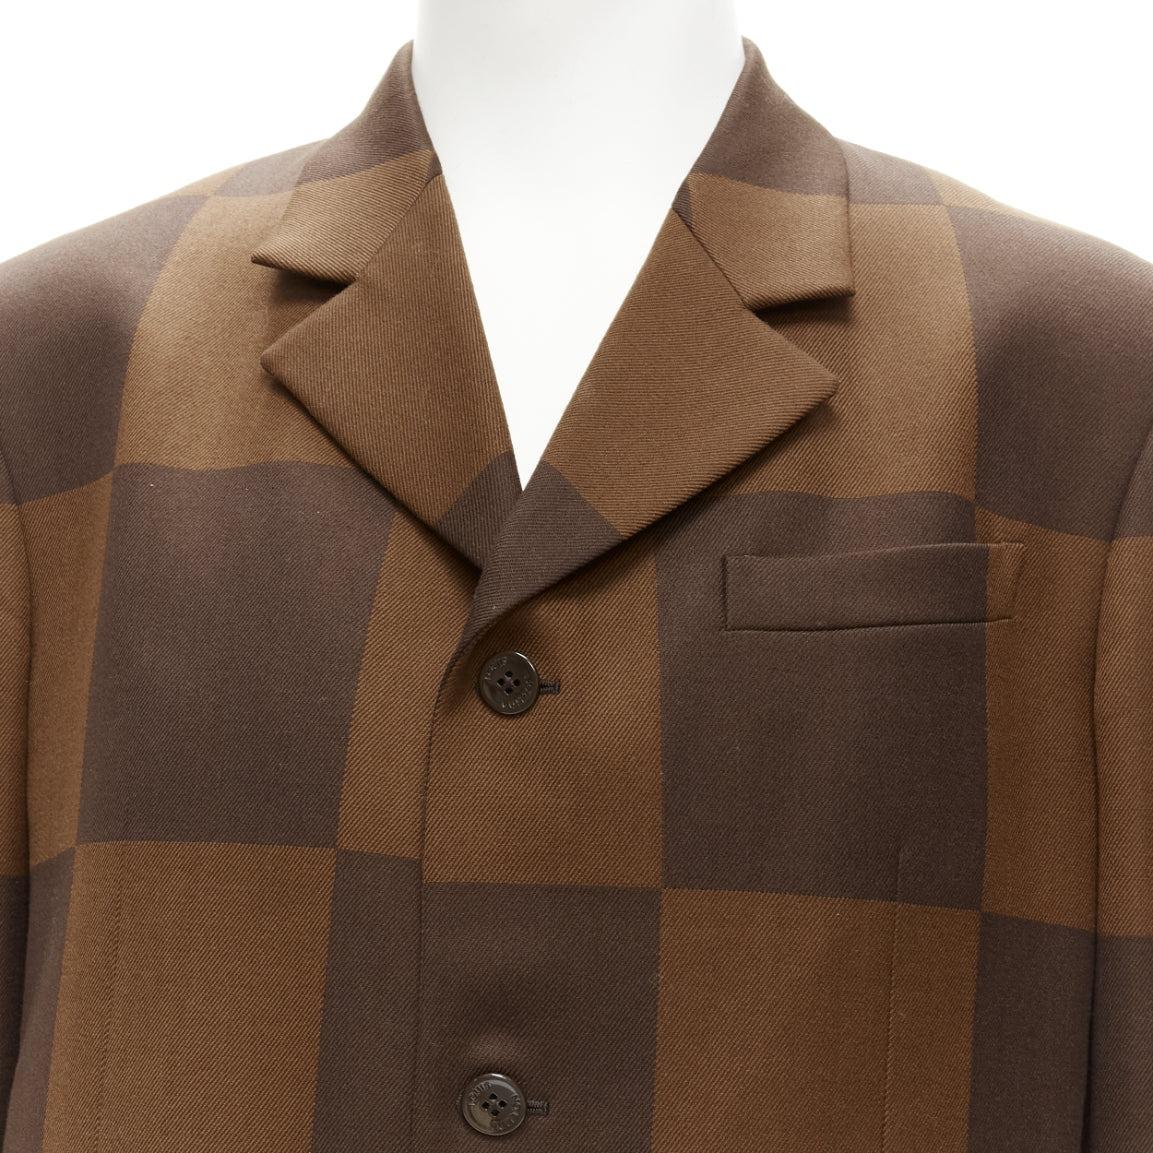 LOUIS VUITTON Nigo 2020 LV2 Runway Giant Damier wool blazer jacket FR52 XL
Reference: TGAS/D00800
Brand: Louis Vuitton
Collection: Nigo 2020 LV2 - Runway
Material: Wool, Blend
Color: Brown
Pattern: Checkered
Closure: Button
Lining: Brown